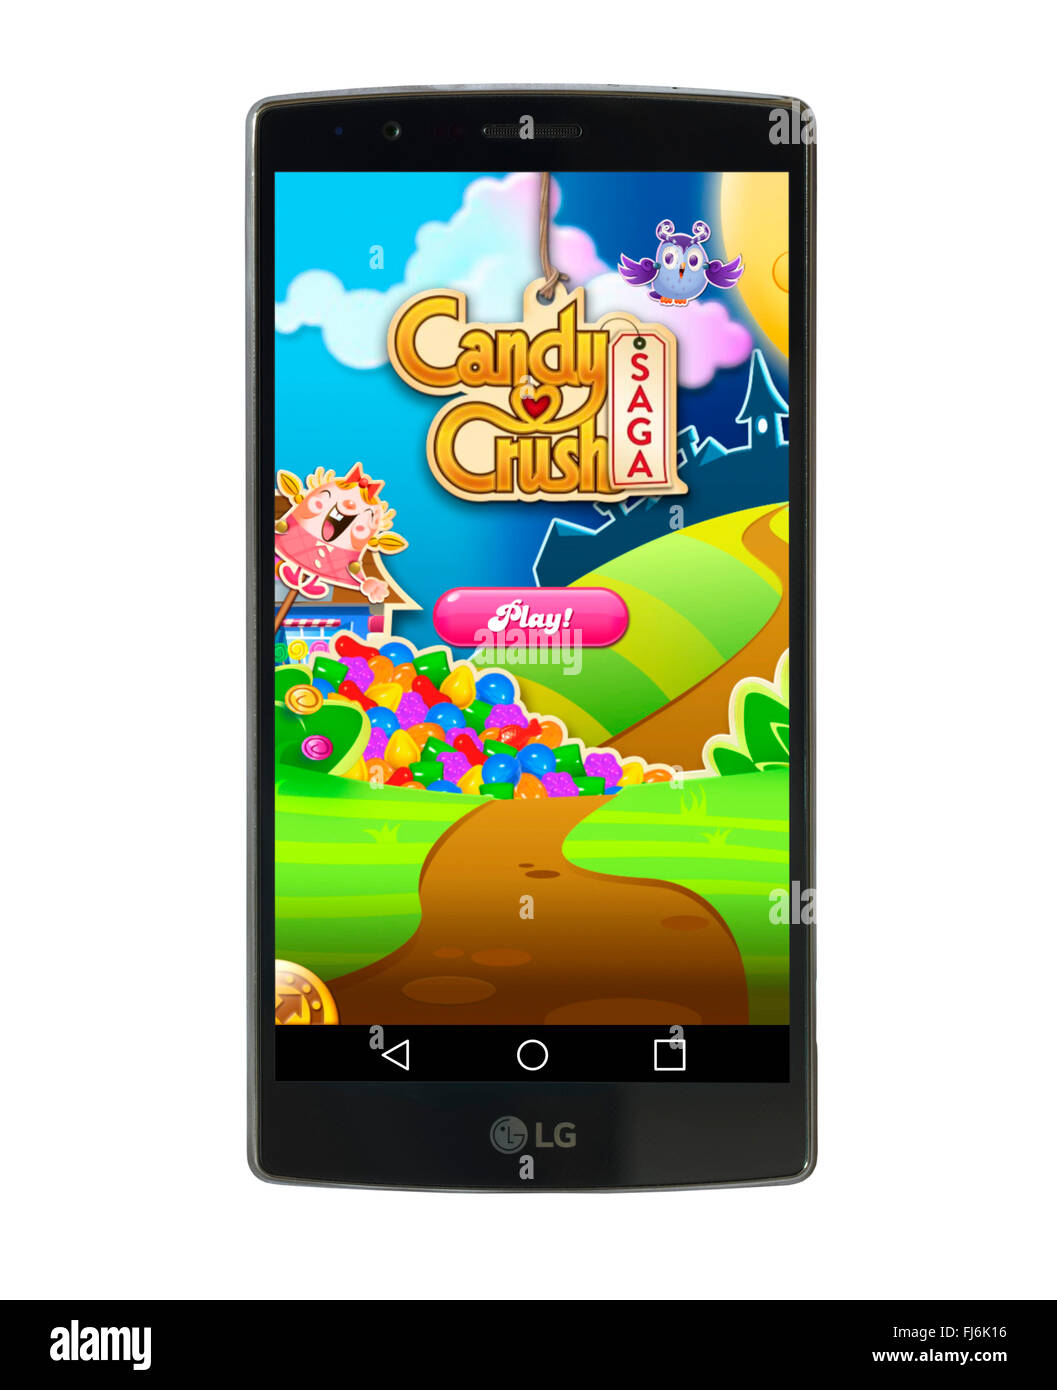 Playing Candy Crush Saga on an LG G4 5.5 inch Android smartphone Stock Photo